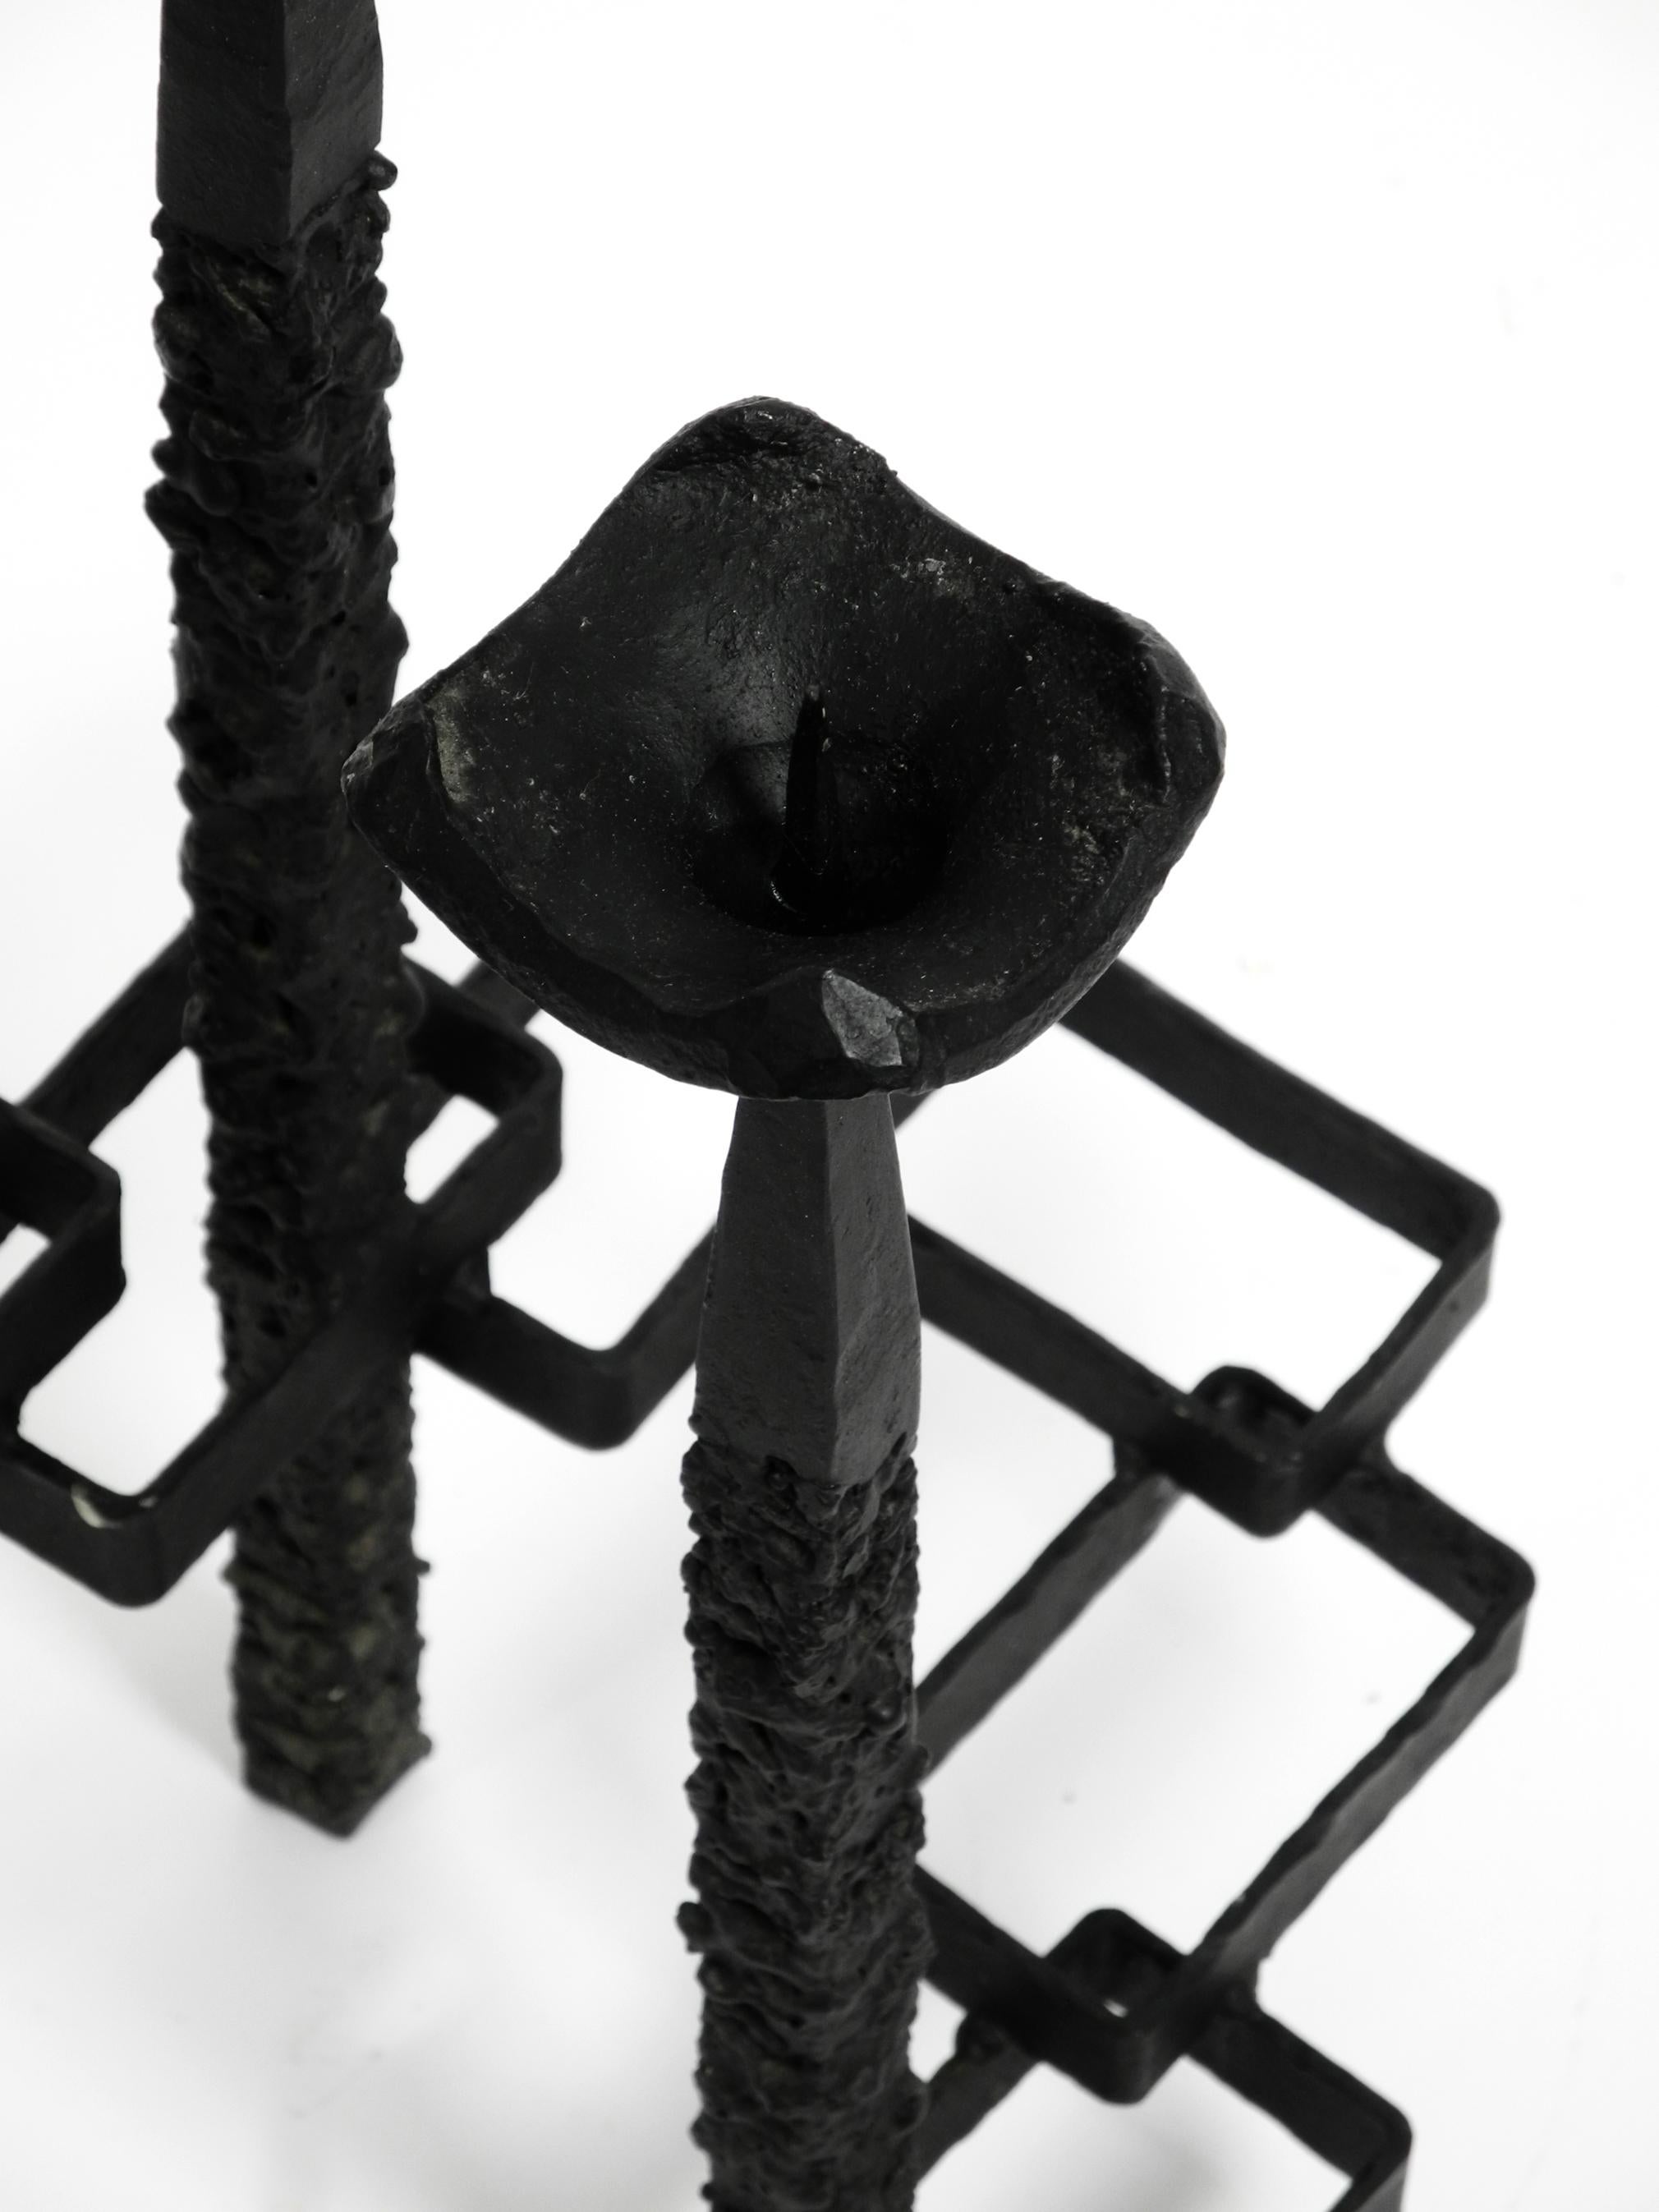 Large Floor or Table Candle Holder Made of Wrought Iron in Brutalist Design  For Sale 1